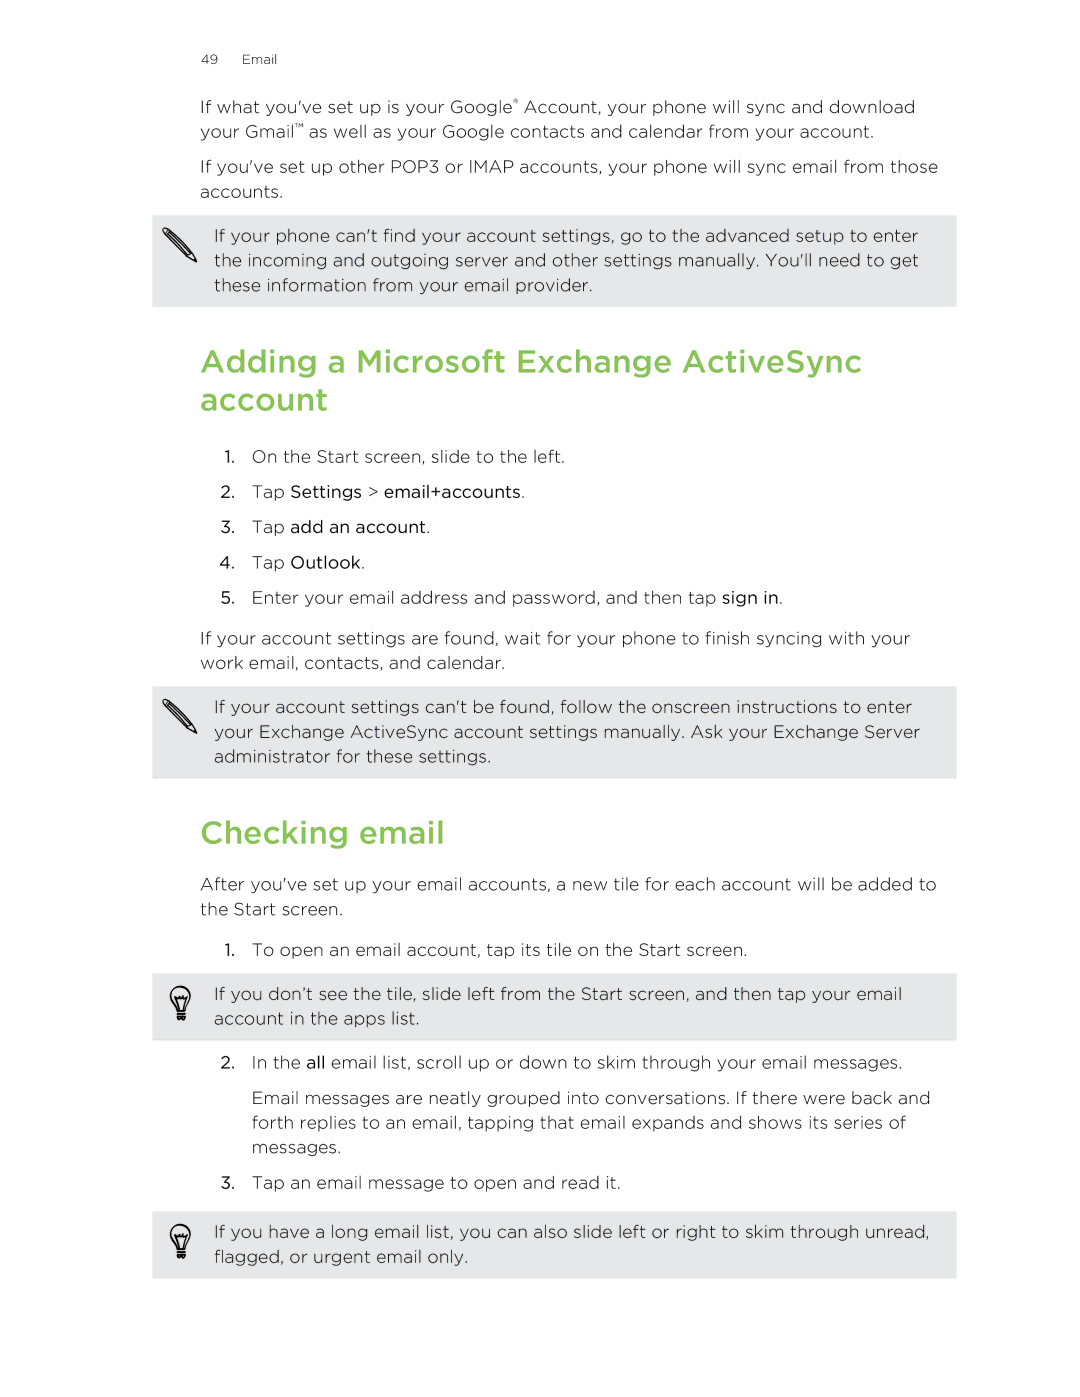 HTC 8X manual Adding a Microsoft Exchange ActiveSync account, Checking email 